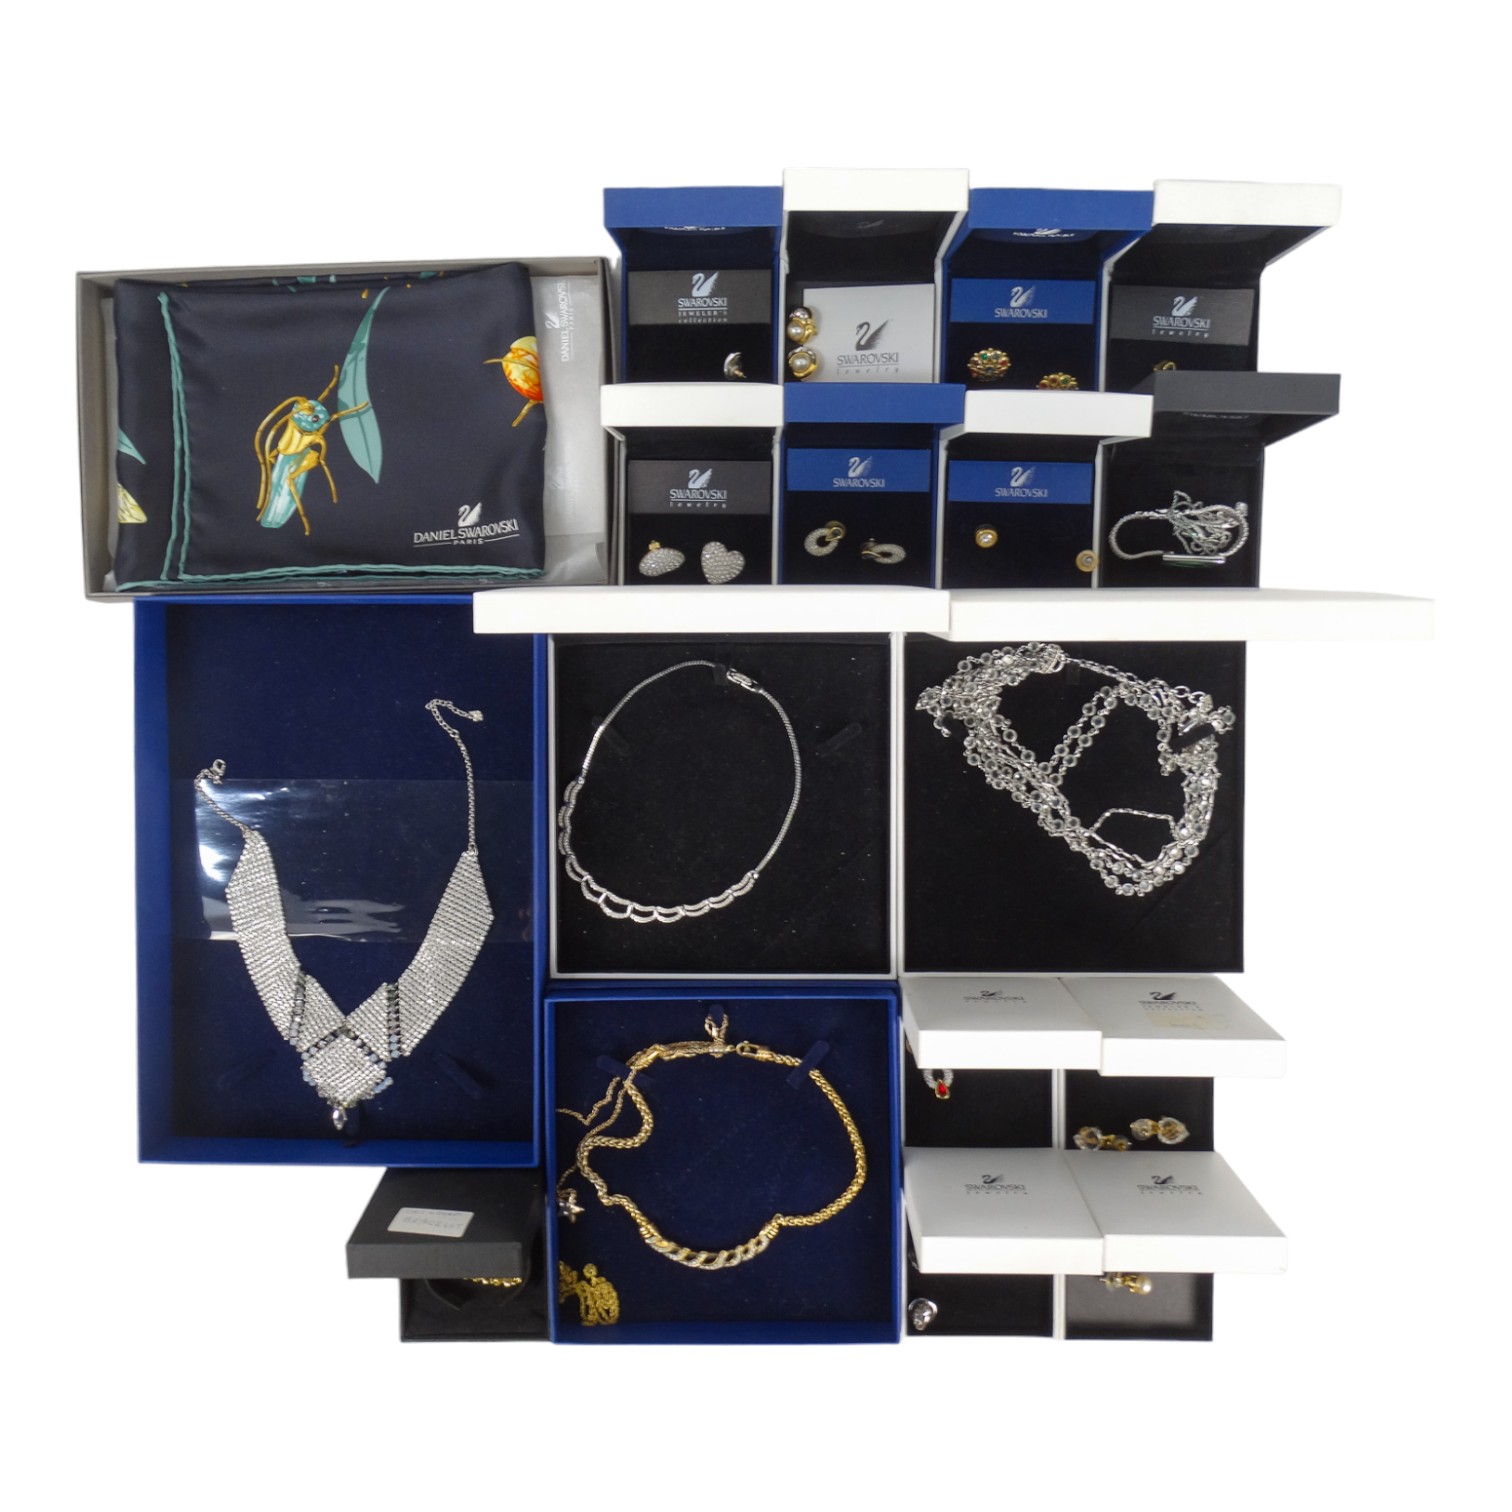 A quantity of Swarovski costume jewellery - many items with original retail boxes - Image 2 of 9